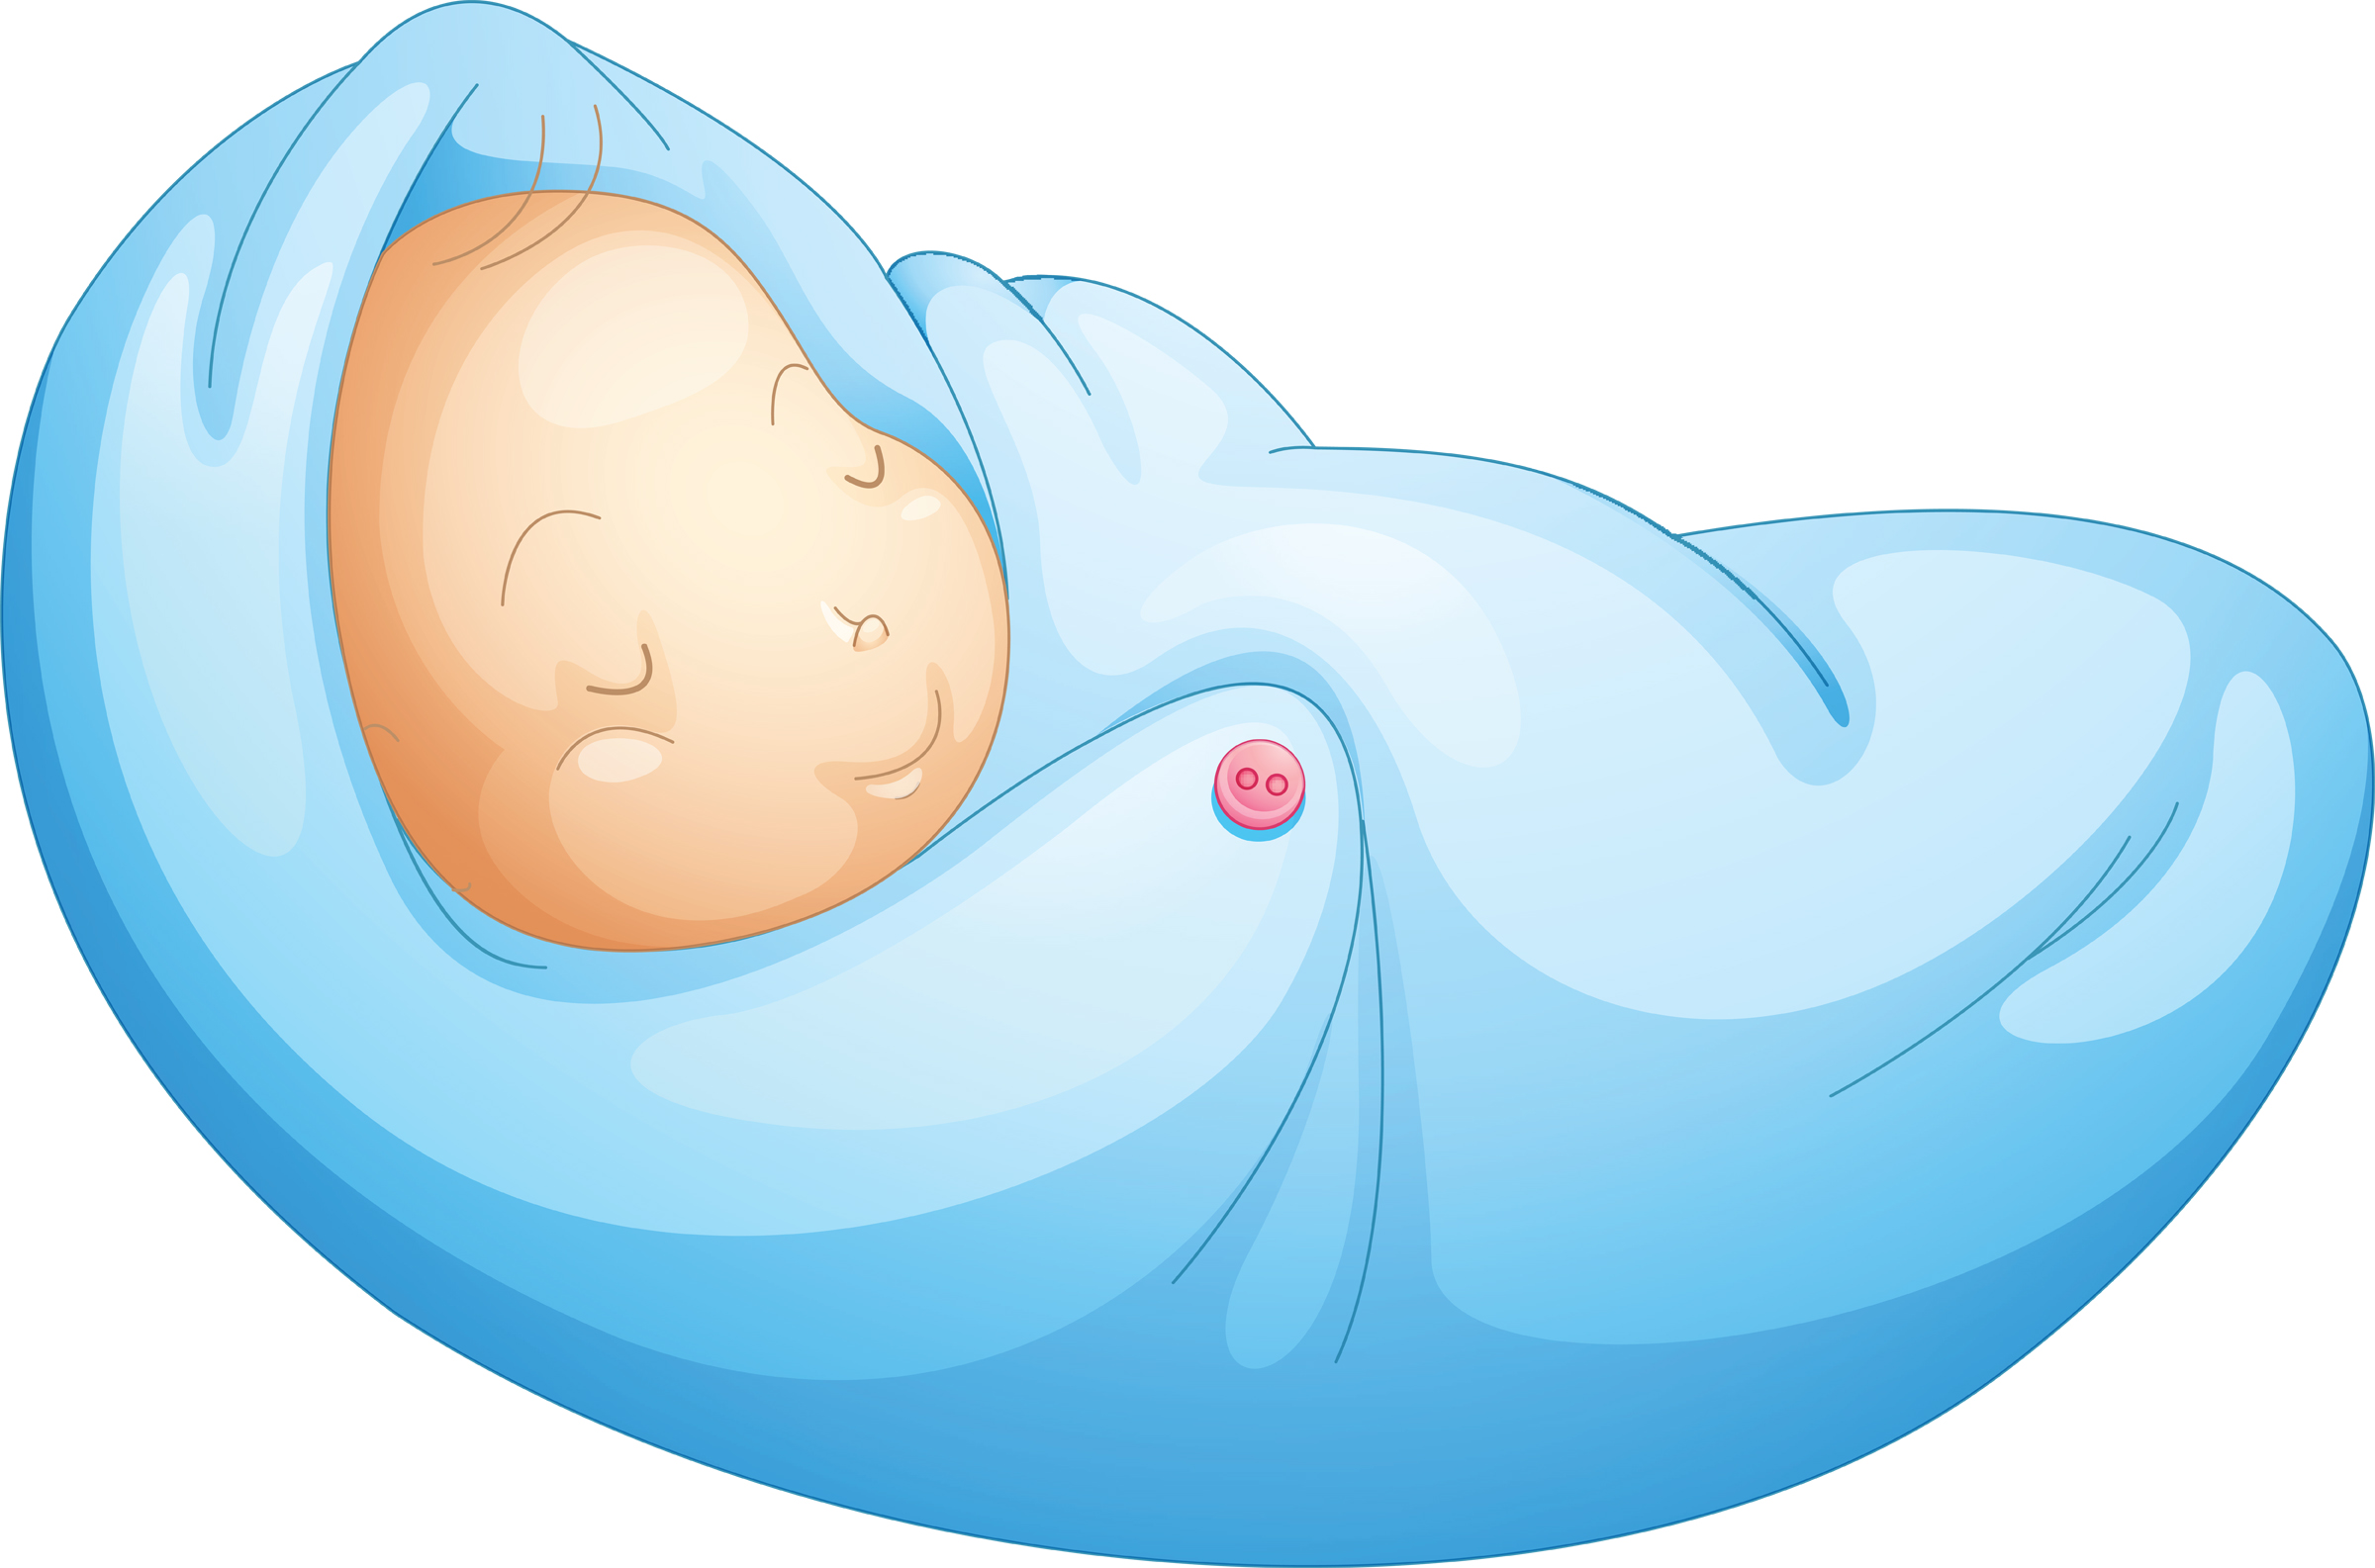 free vector baby shower clipart - photo #28